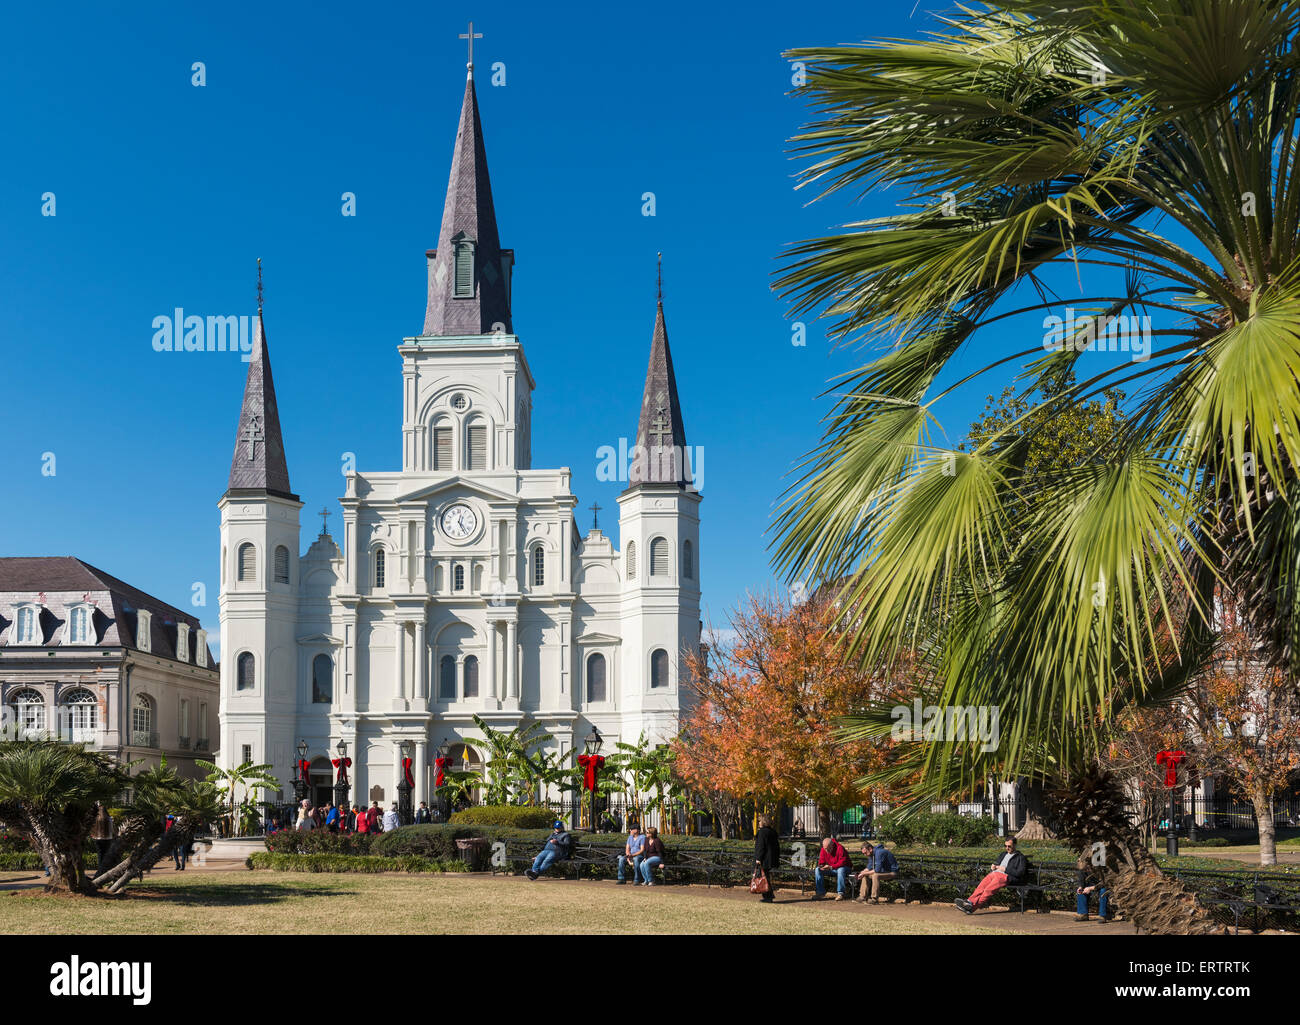 New Orleans French Quarter - St Louis Cathedral, Jackson Square New Orleans, Louisiana, Stati Uniti d'America Foto Stock